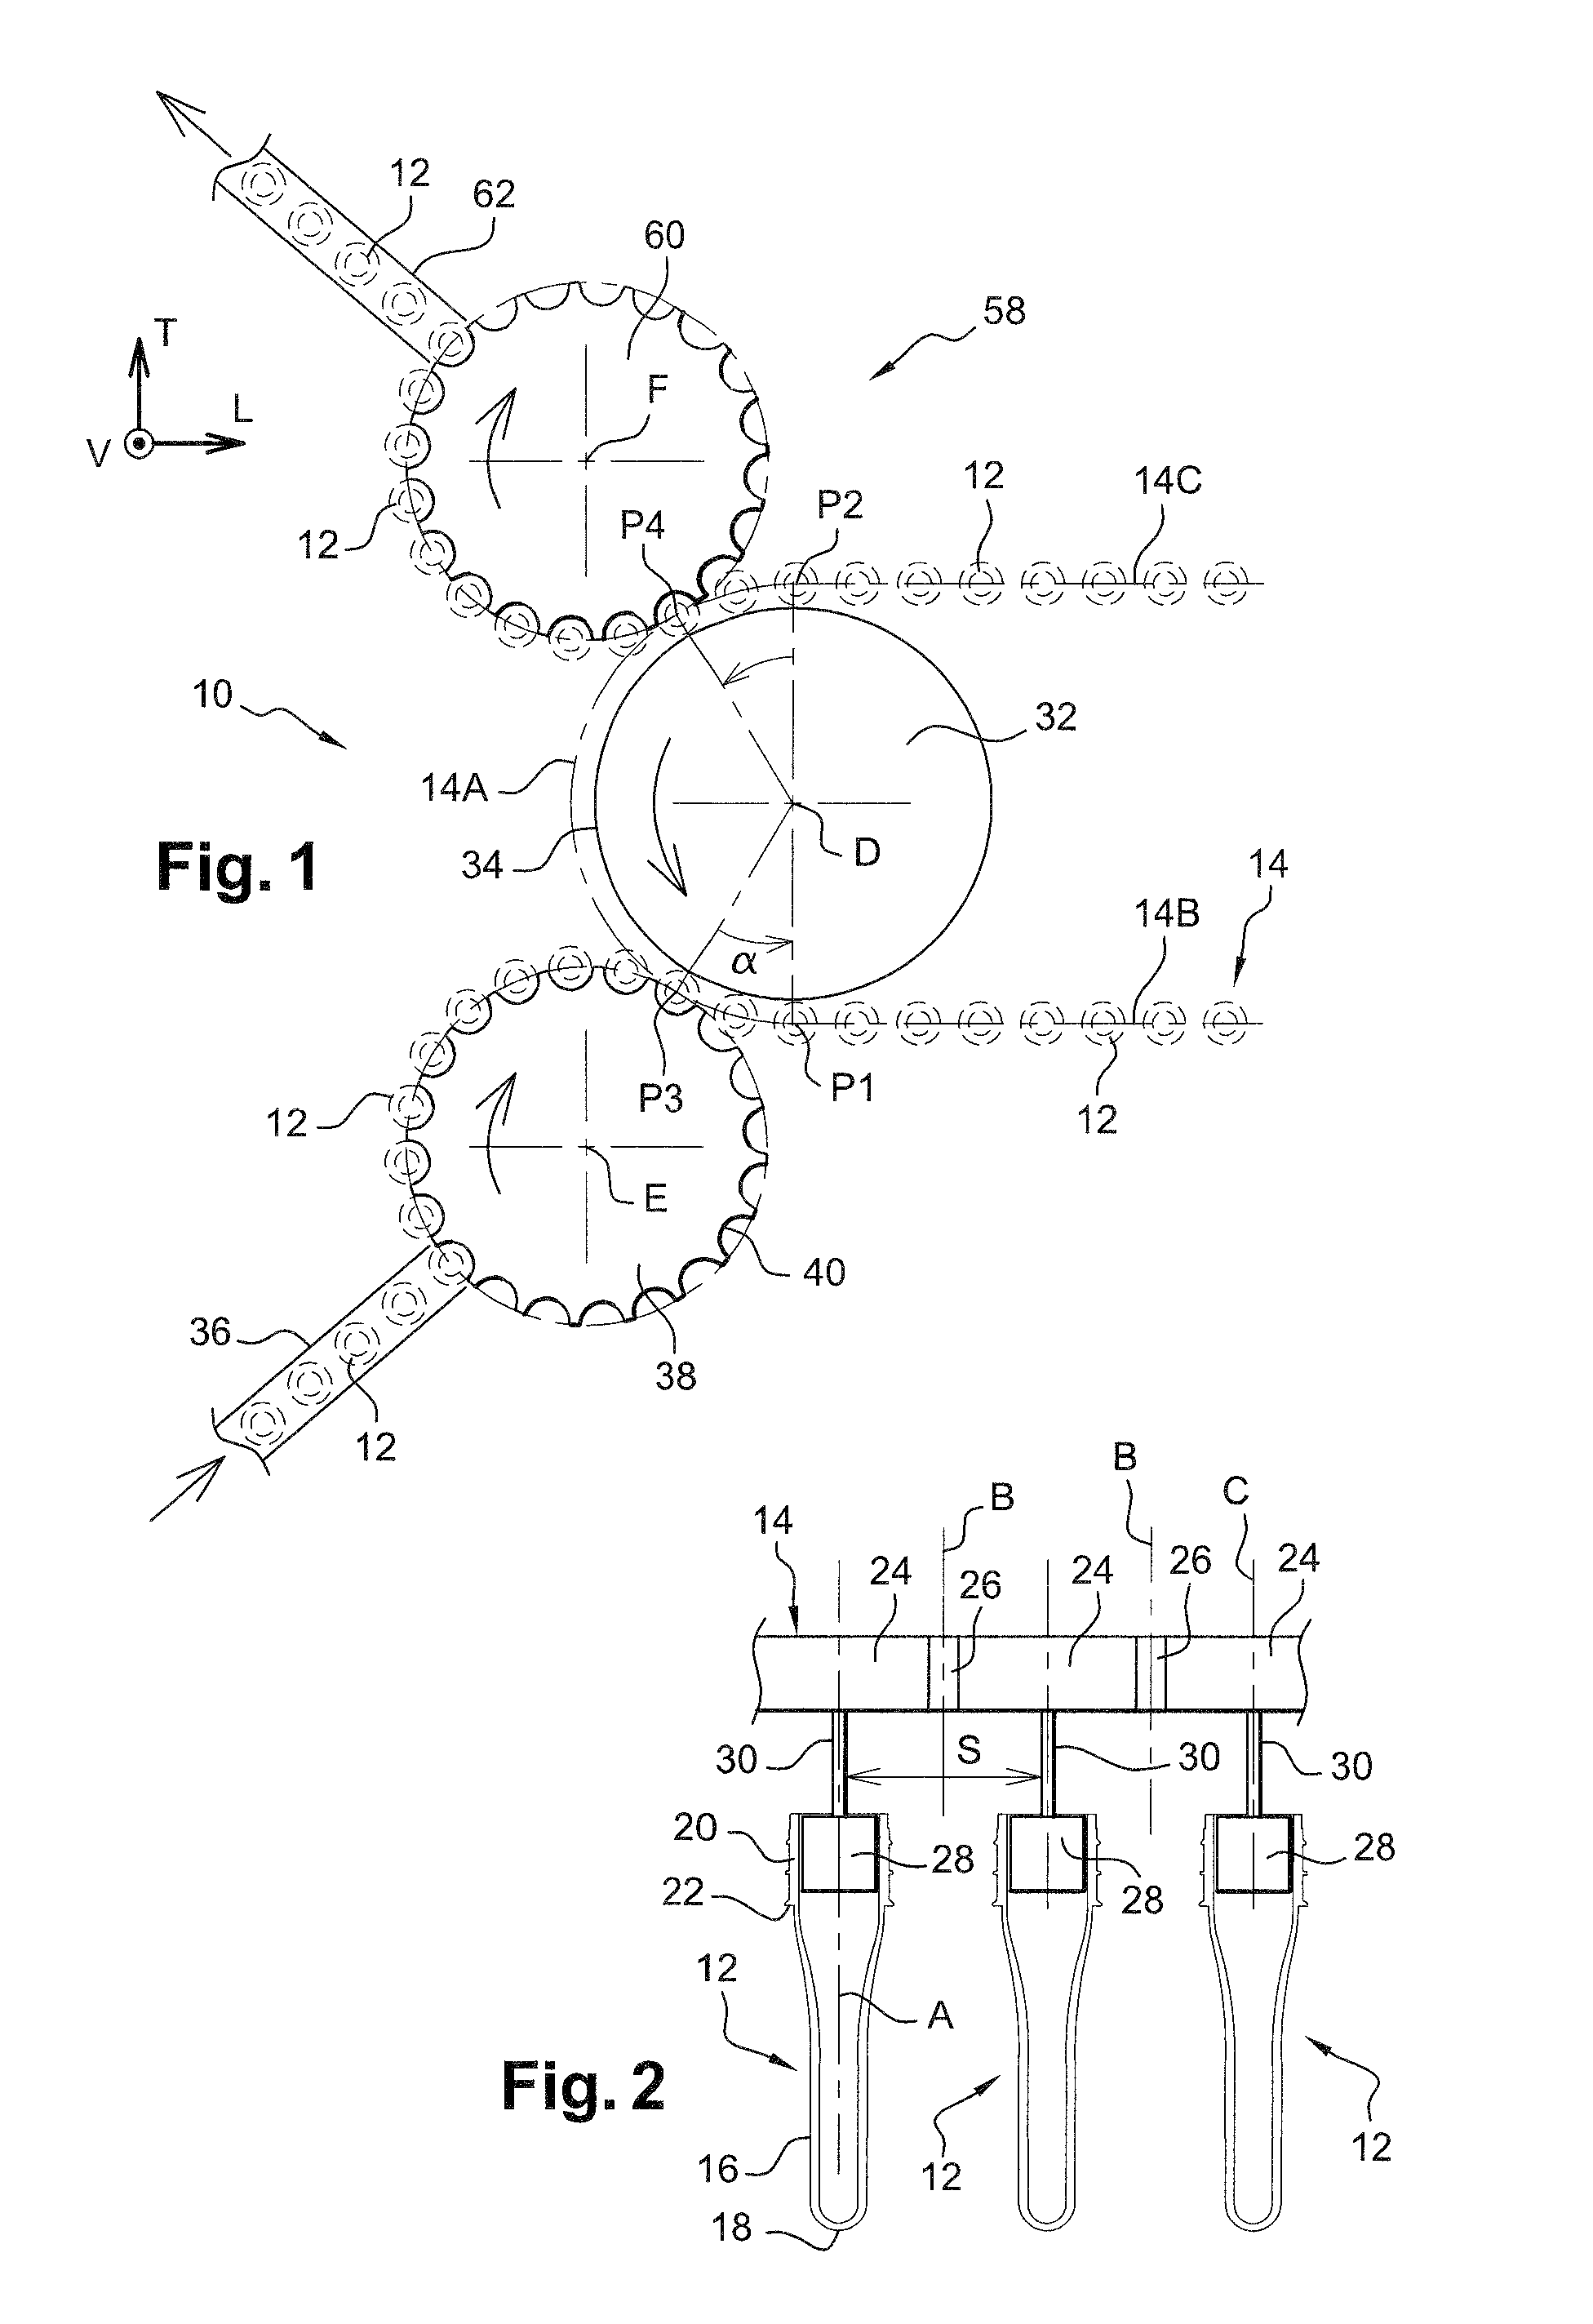 Device for loading containers on a transporting element provided with means for ejecting incorrectly loaded containers